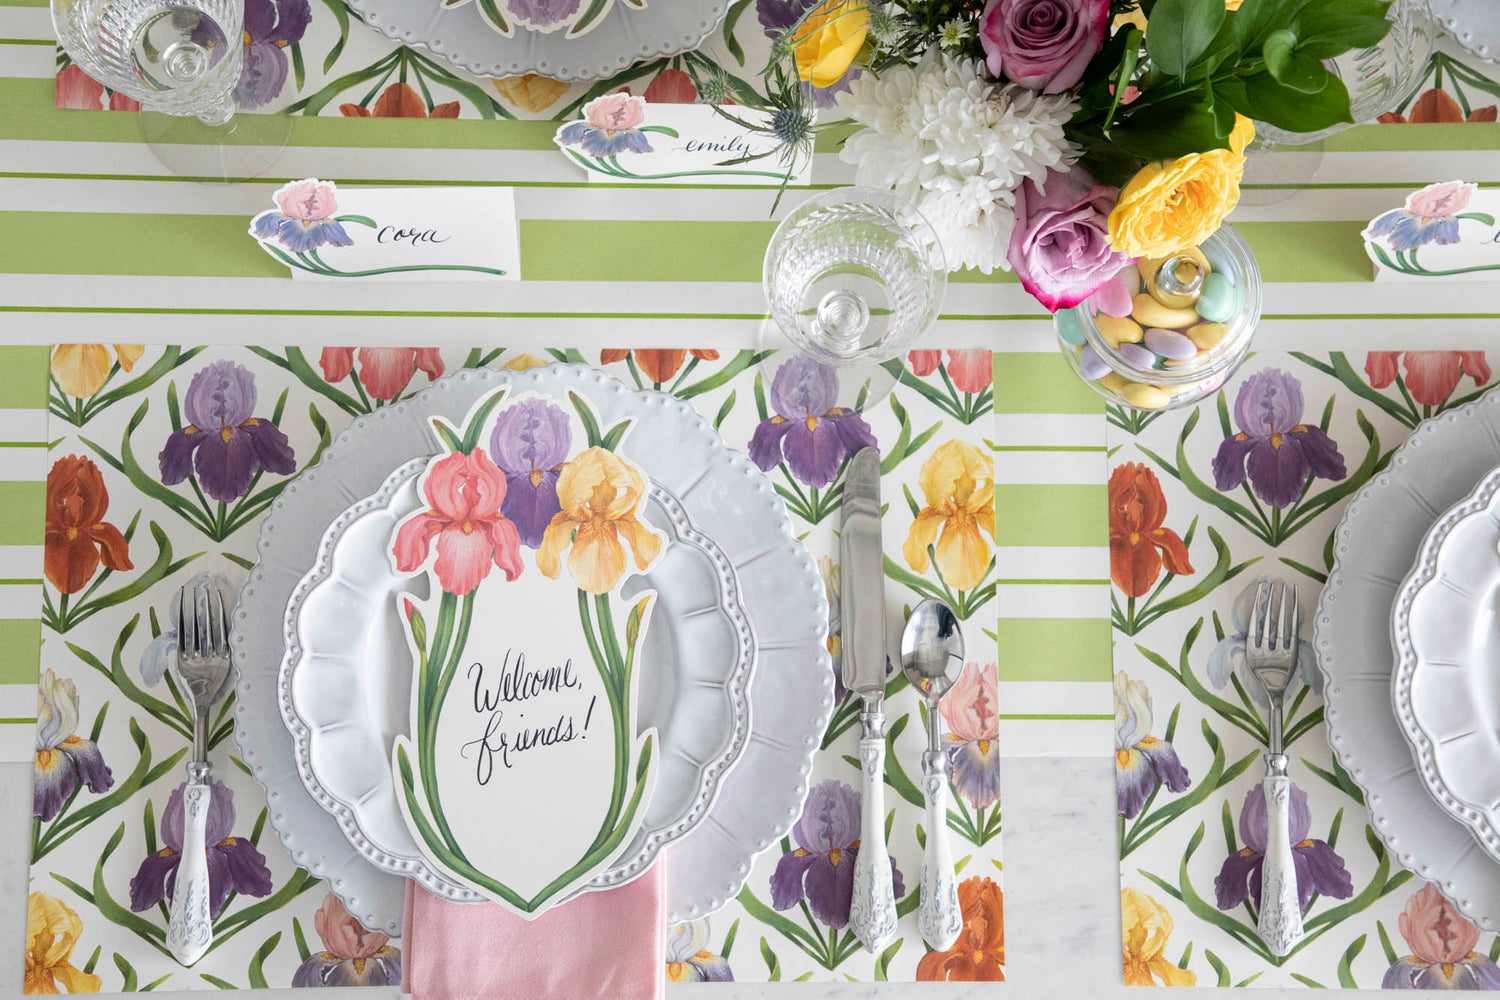 Top-down view of an elegant floral tablescape with Iris Place Cards at each place setting.